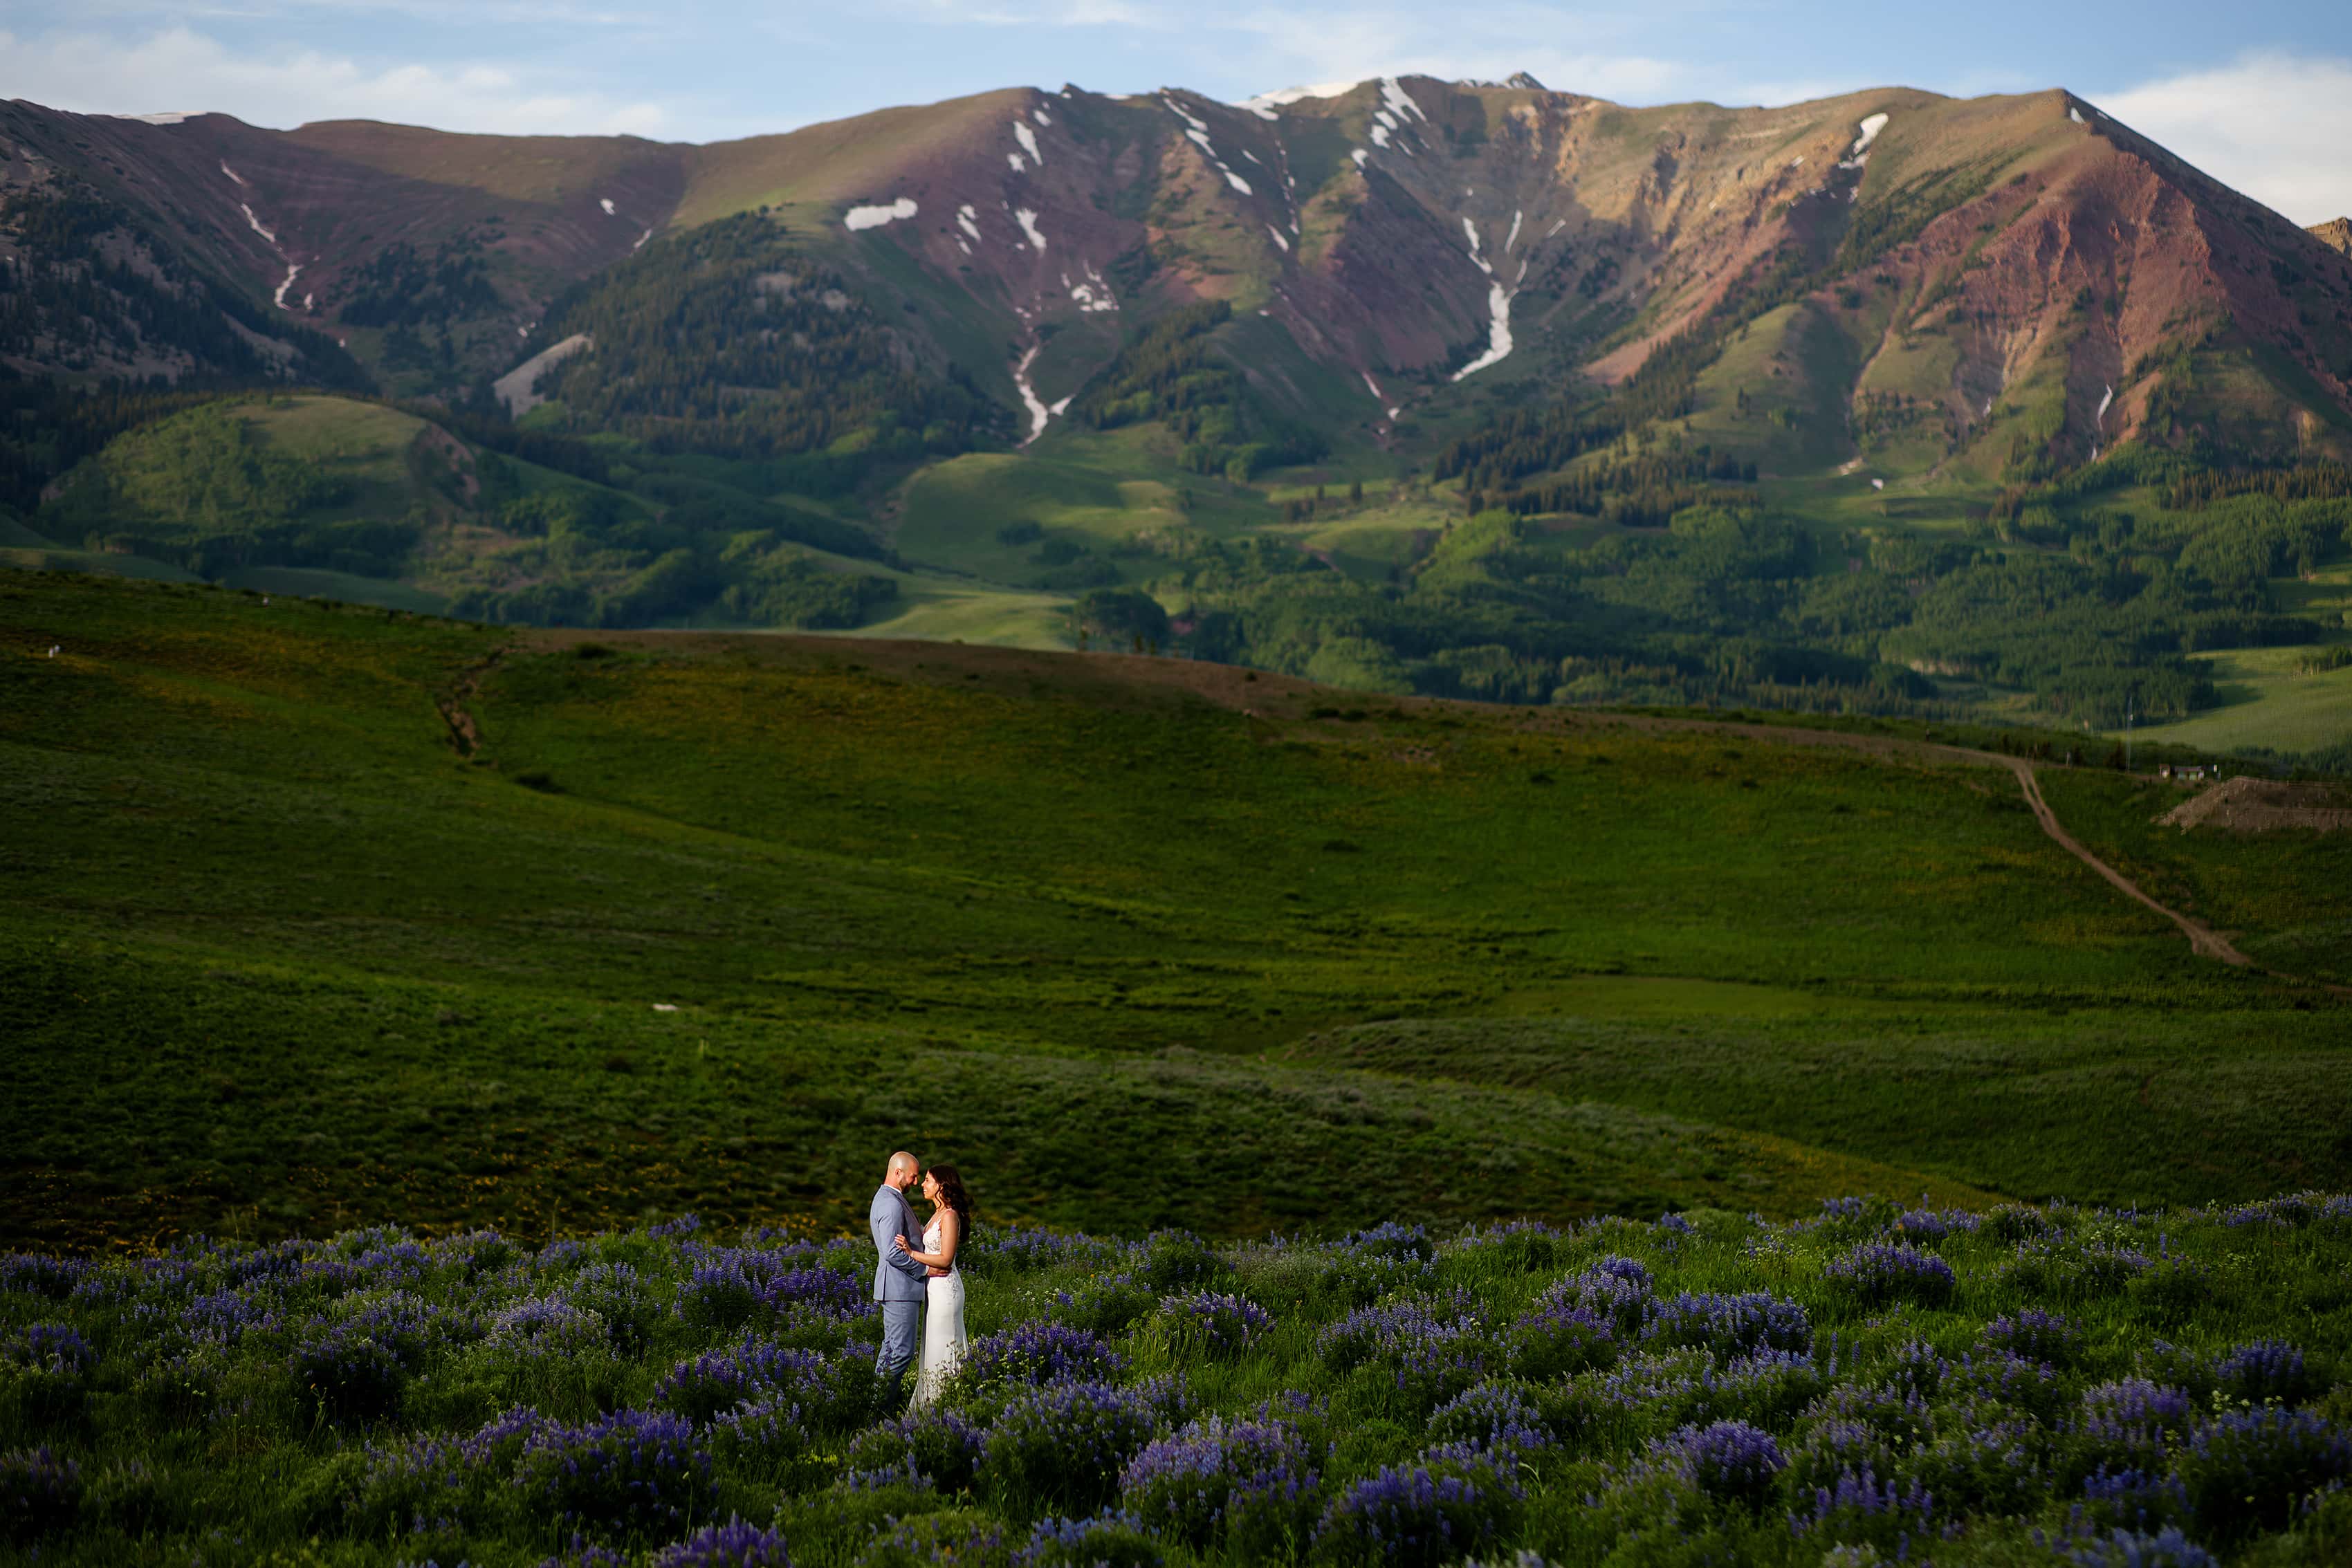 The bride and groom pose during their summer wedding day in Crested Butte